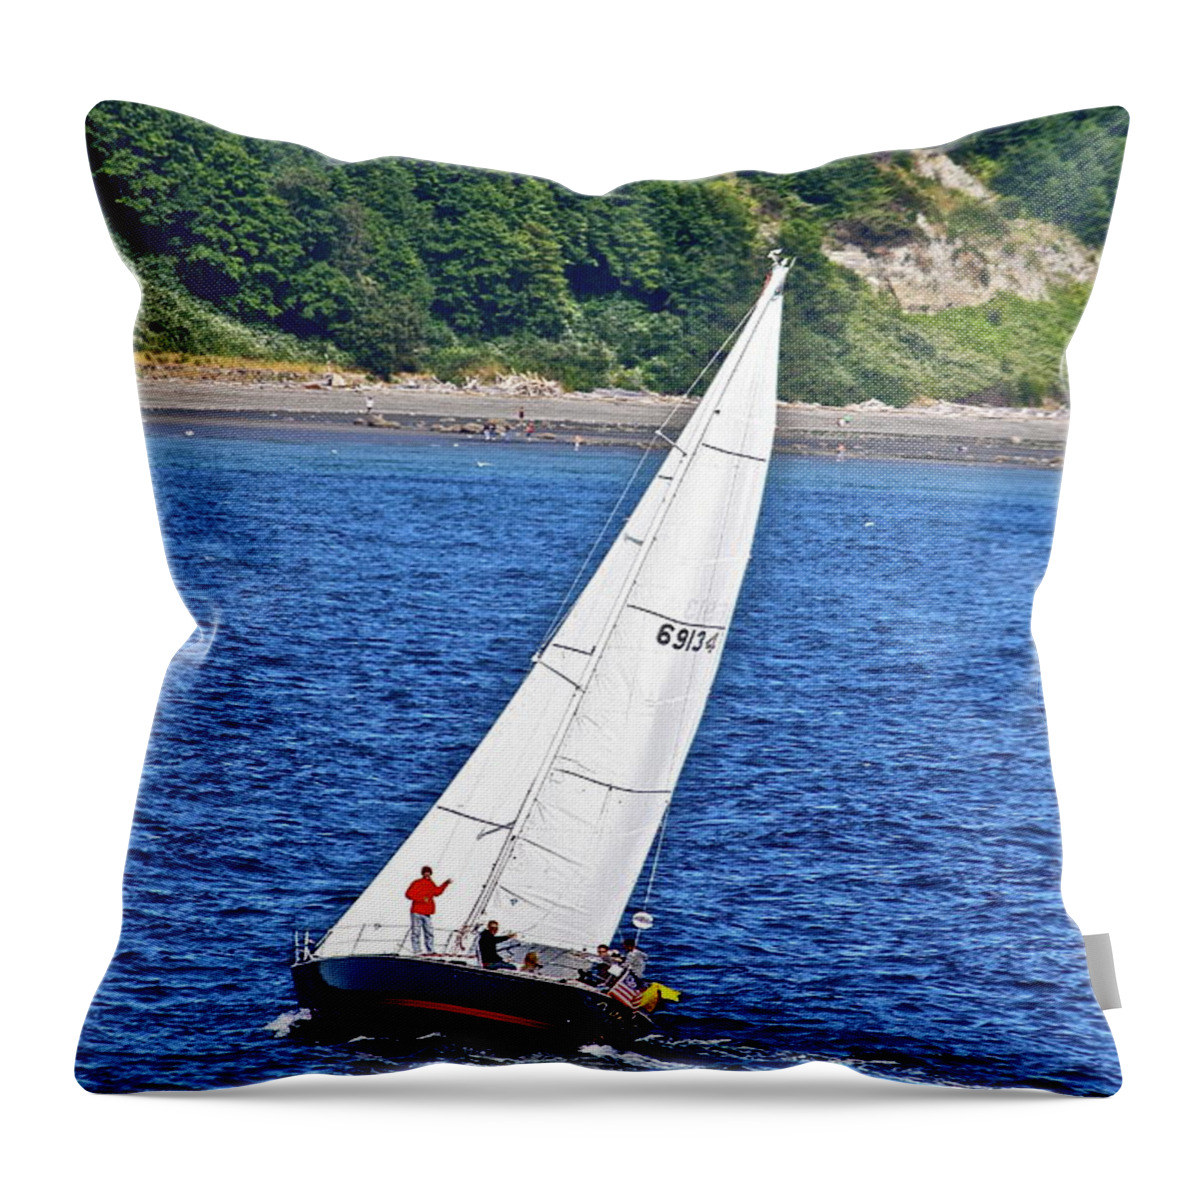 Boat Throw Pillow featuring the photograph Wind Friend by Diana Hatcher